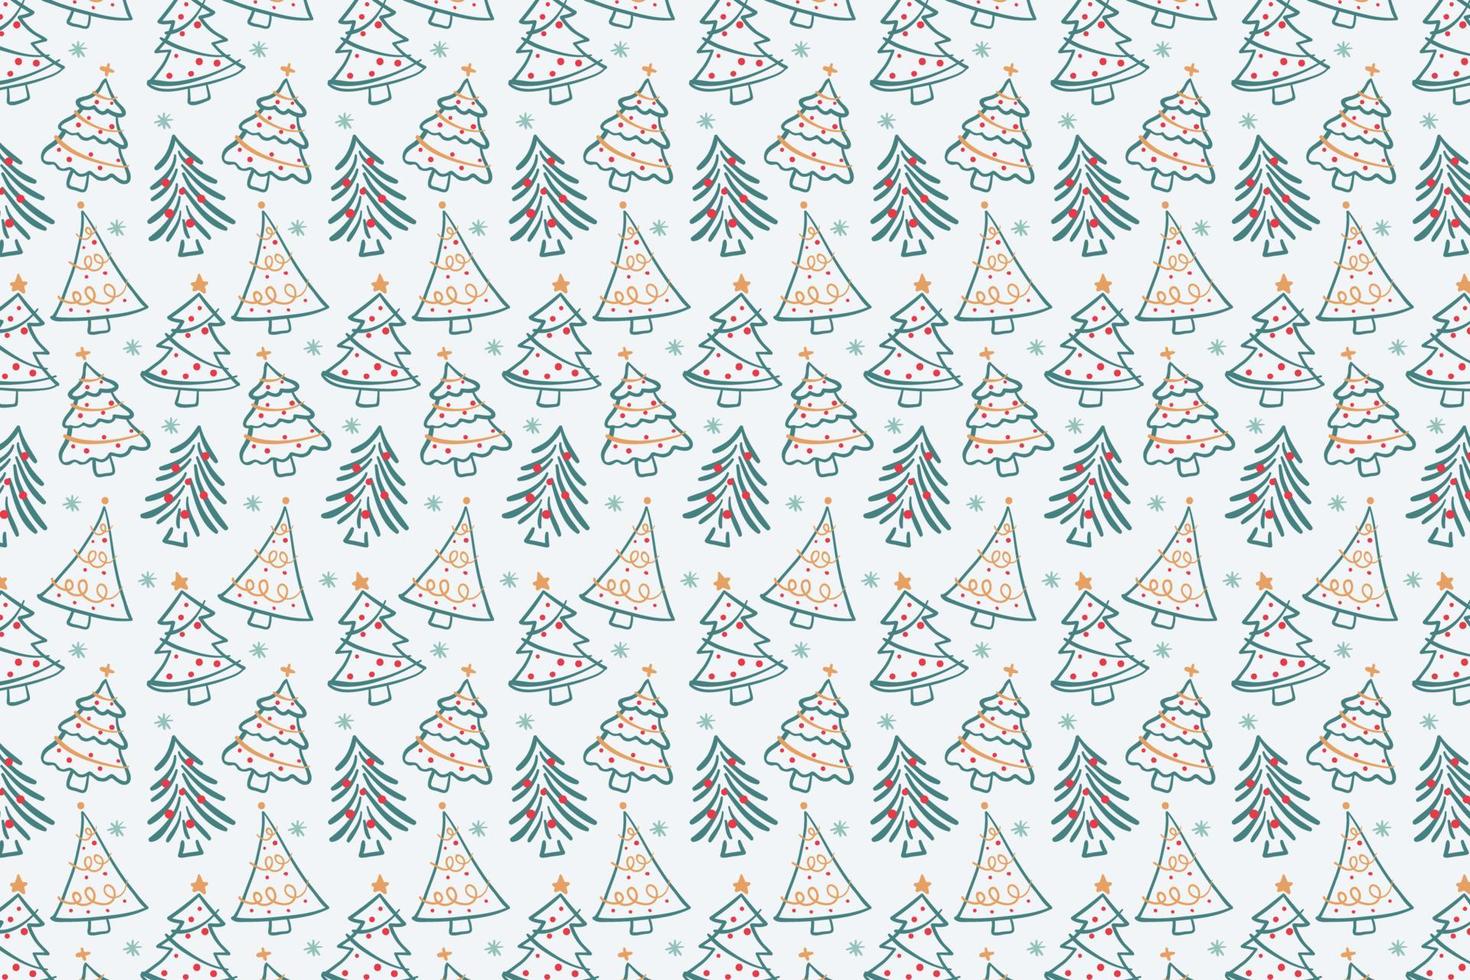 Christmas pattern background. Suitable for wallpaper, wrapping, fabric, card, etc vector